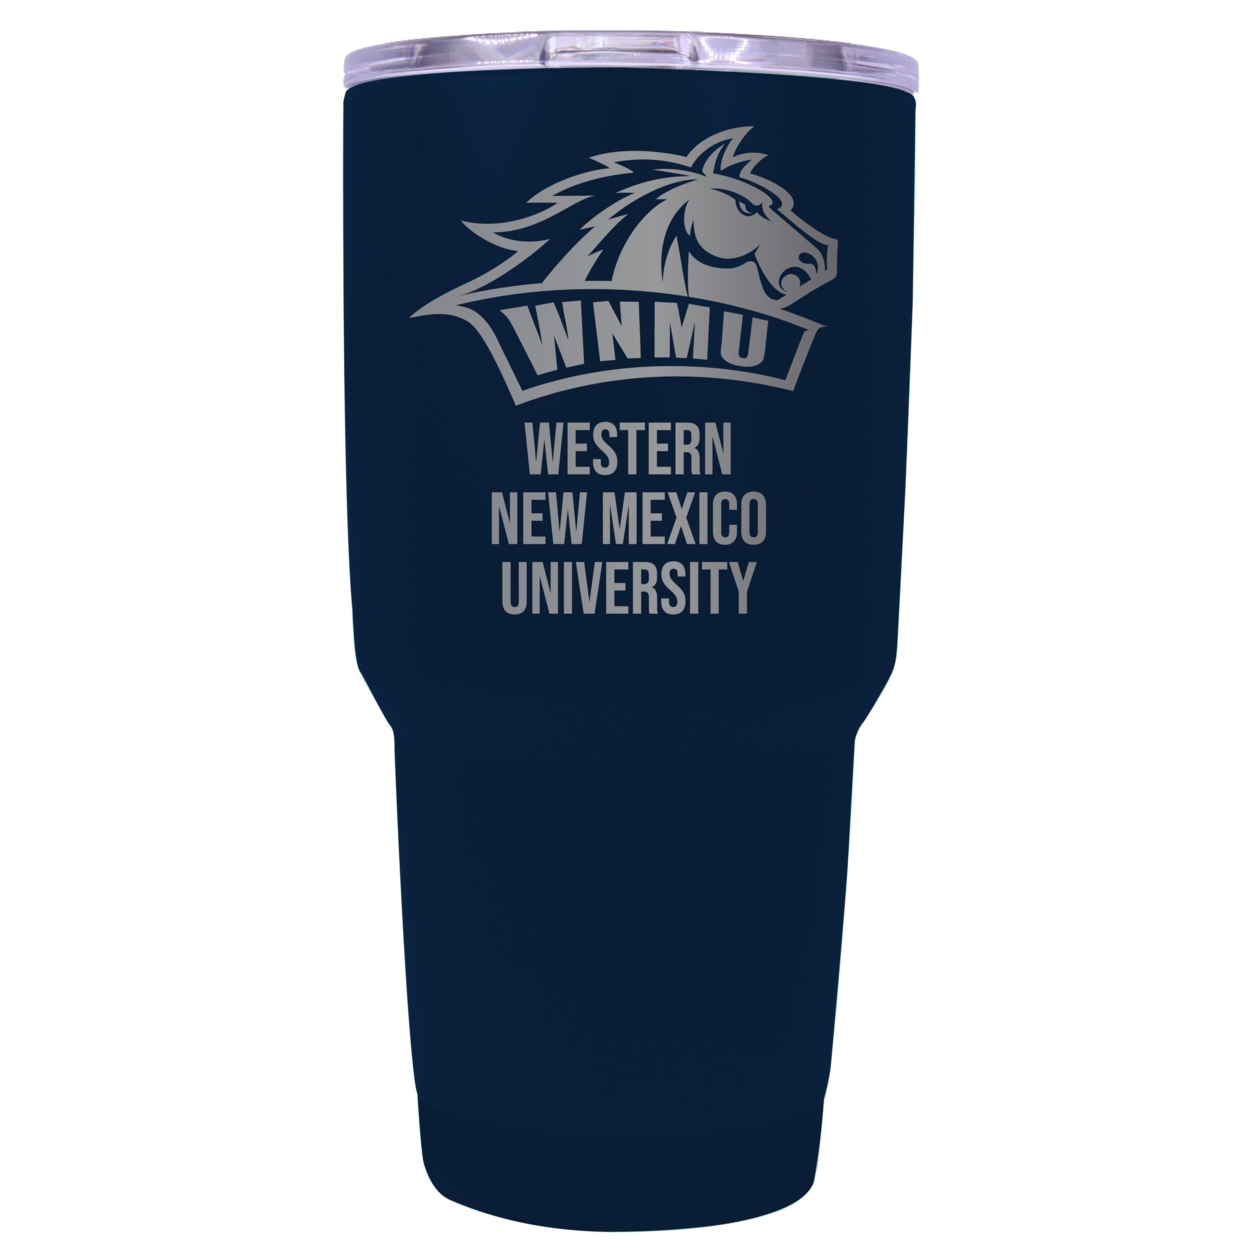 Western New Mexico University 24 Oz Laser Engraved Stainless Steel Insulated Tumbler - Choose Your Color. - Navy